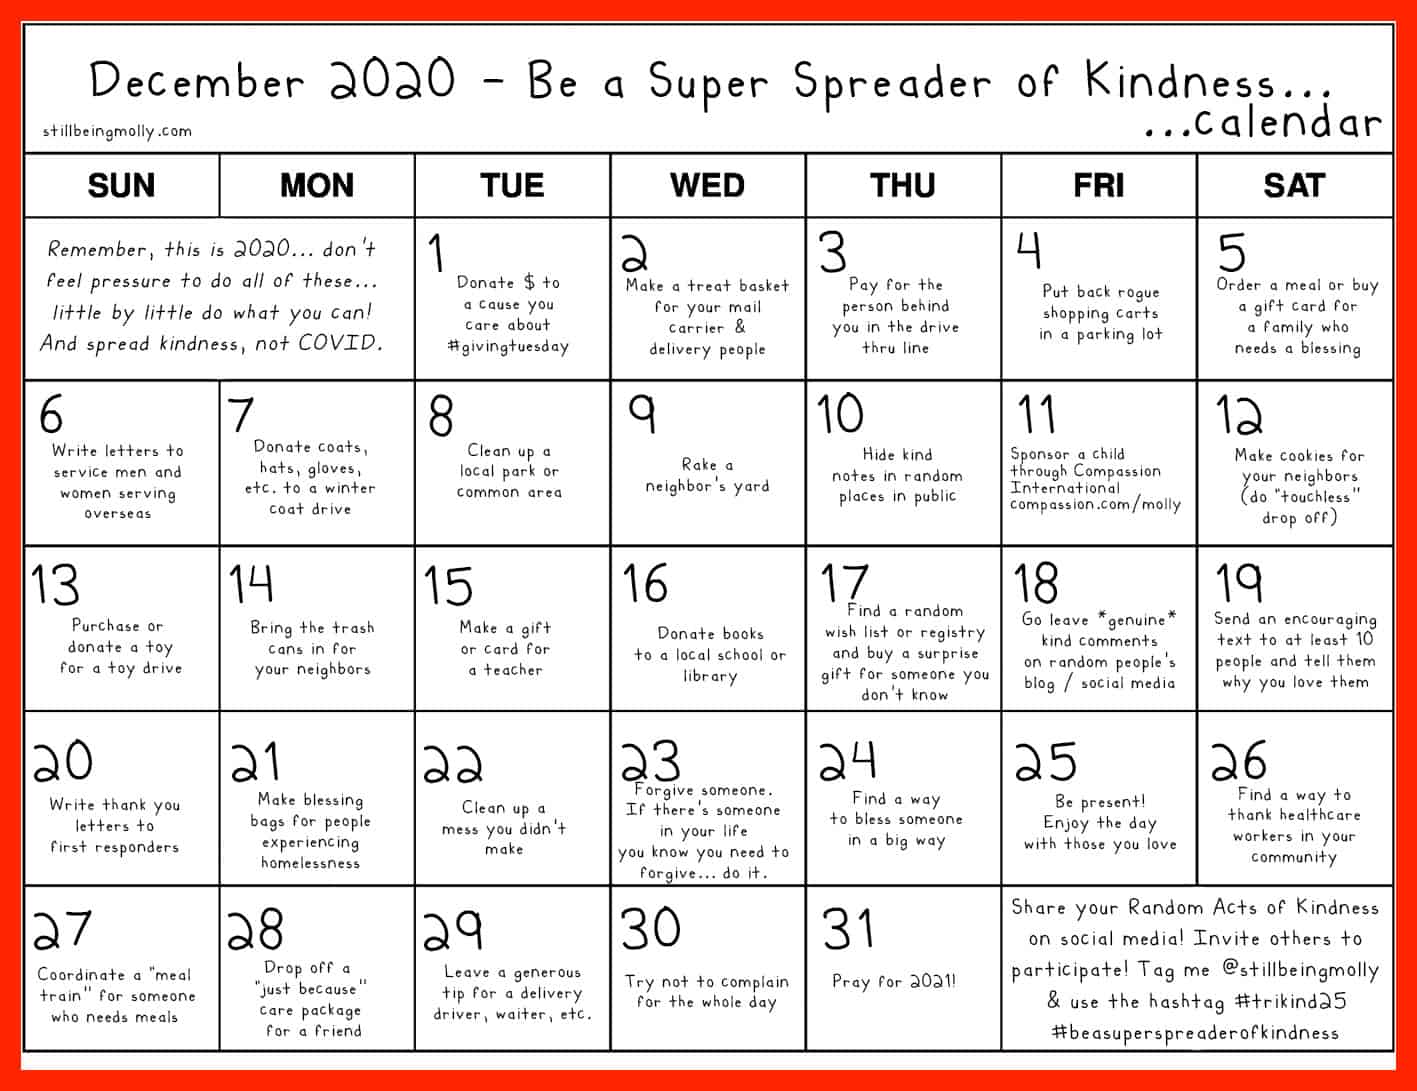 It's our 6th annual random acts of kindness calendar! This year is a little different... The 2020 "Be a Super Spreader of Kindness" Calendar